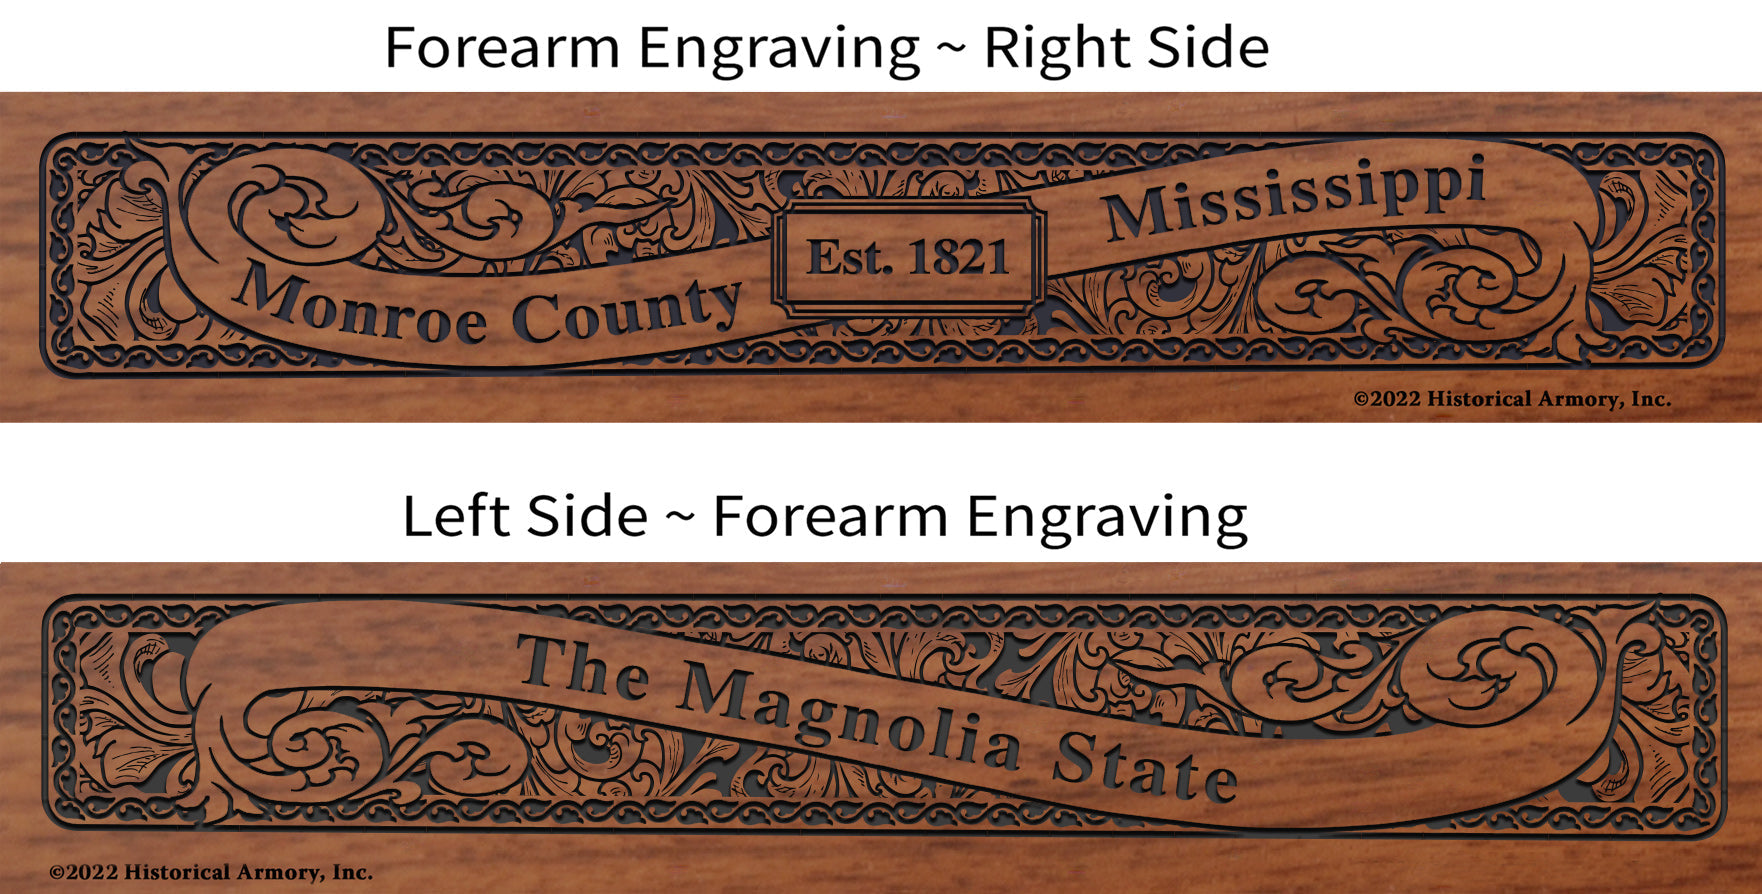 Monroe County Mississippi Engraved Rifle Forearm